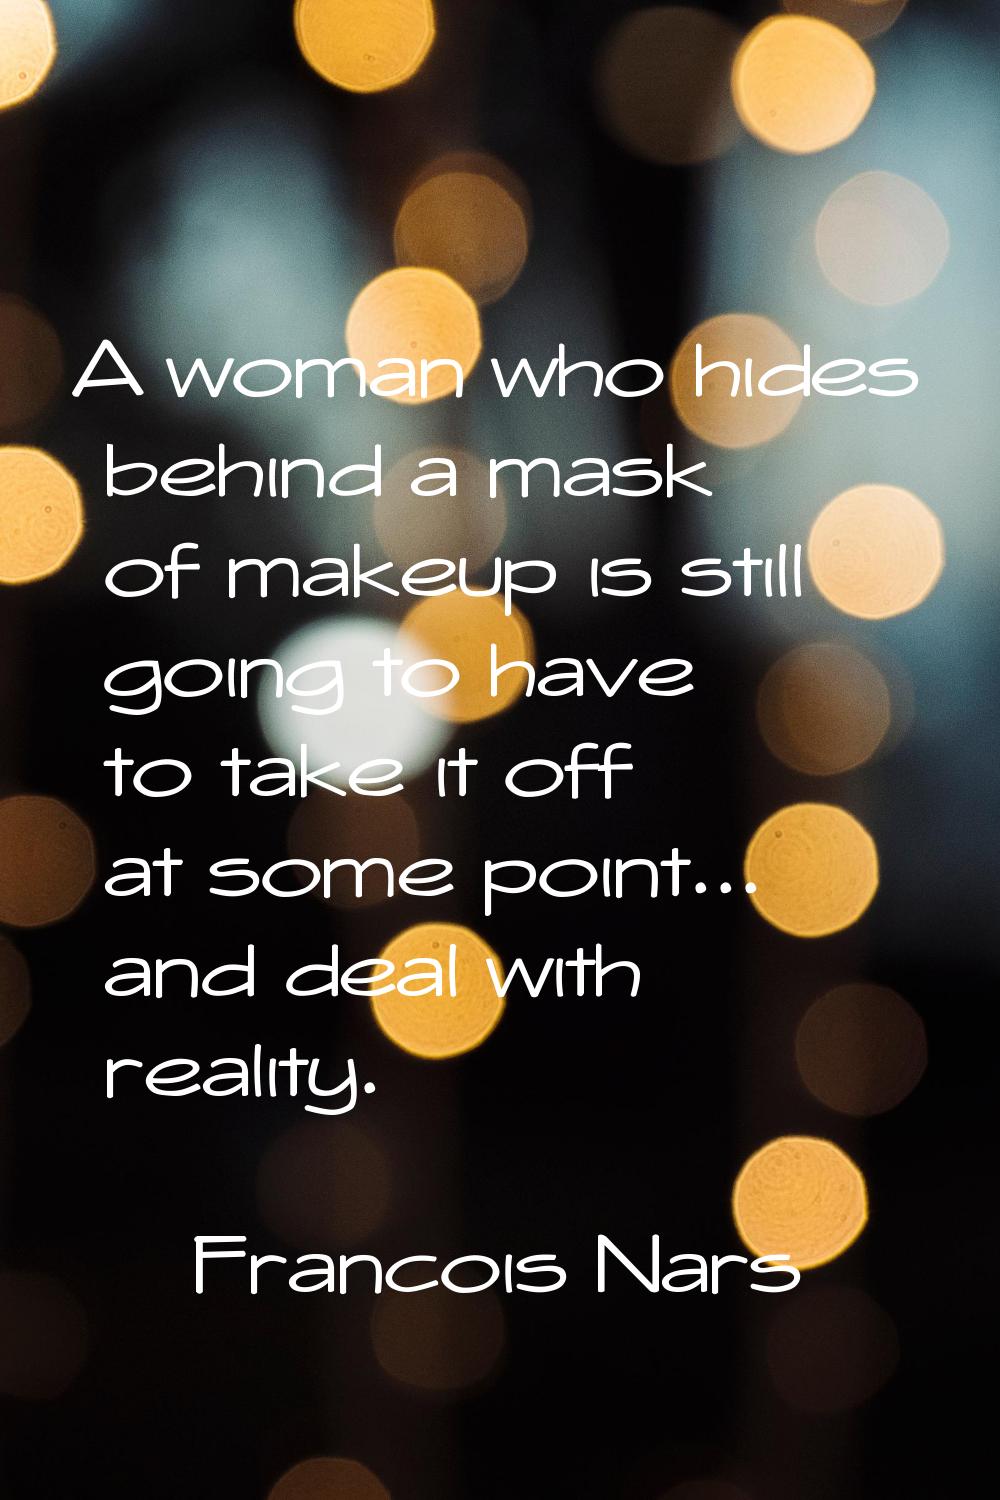 A woman who hides behind a mask of makeup is still going to have to take it off at some point... an